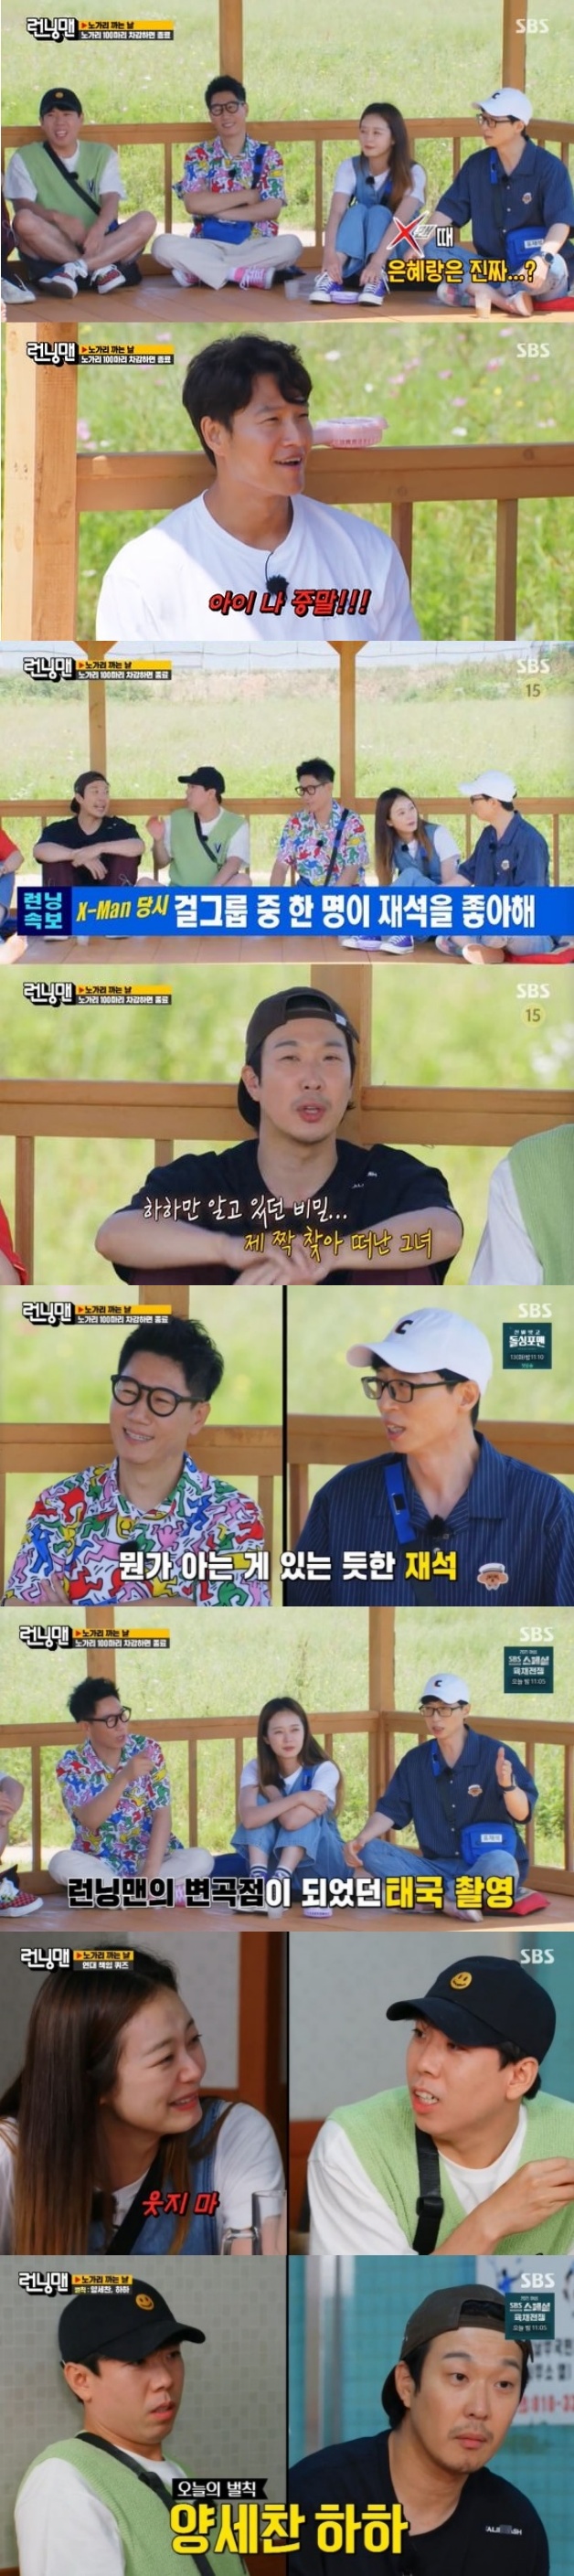 SBS Running Man created another legend with the talk of the members.The SBS entertainment program Running Man, which aired on the 4th, kept the top spot in the same time zone with an average of 3% of SBSs 2049 TV viewer ratings (hereinafter based on Nielsen Korea metropolitan area and households), and the average TV viewer ratings soared to 5.8% and the highest TV viewer ratings per minute to 8.1%.On this day, the broadcast was decorated with a new concept talk race We Gon Be Right Day that can be done by constantly chatting.It was created to actively reflect the audiences opinion that members can make a single episode with only talk.We Gon Be Alright Day Race is a mission to deduct 100 We Gon Be Alrights, and We Gon Be Alright can be deducted if you chat without silence for 10 minutes.If you hang up for more than 10 seconds, two We Gon Be Alright will be added. The members poured out the talk bomb from the beginning and were interested in various behind-the-scenes talk that could not be heard anywhere.Haha recalled the days of X Man and revealed that one of the girl groups liked Yoo Jae-Suk.Yoo Jae-Suk said, I have never received a dash, but Kim Jong Kook said, It is a straight image now, but there was a little bit of slap when I was kung-tung.Yoo Jae-Suk brought up the story that made up the members of the present at the early stage of Running Man project.Yoo Jae-Suk said about Song Ji-hyo, When I came to the Family Out guest once, I said Ill be tired and go to rest, but I did not start recording.I was snoring in the next room, and I was the top candidate for that, he said, and about Ji Suk-jin, Ji Suk-jin was careful because I was close.I remember the production team asking for their opinions and telling them as objectively and coolly as possible.Song Ji-hyo mentioned Lee Kwang-soo in the early days of Running Man.Song Ji-hyo said, I was a woman, so I could not easily get along with my brothers in the early days, but Lee Kwang-soo called me a few times saying Lets see together.At that time, I thought a little I am so excited and said, Do not call me. I did not get a phone call. In addition, Jeon So-min started his special talent Love Talk and recently surprised everyone by mentioning Thumbnam and saying Hon-nam.I was active, so I asked him to walk home together. I walked too long. I said go sister at the stop.The members made a lot of the past class with the talk that made the production team tired, and Yang Se-chan and Haha were decided as the final penalties.The scene was the best TV viewer rating per minute with 8.1%.